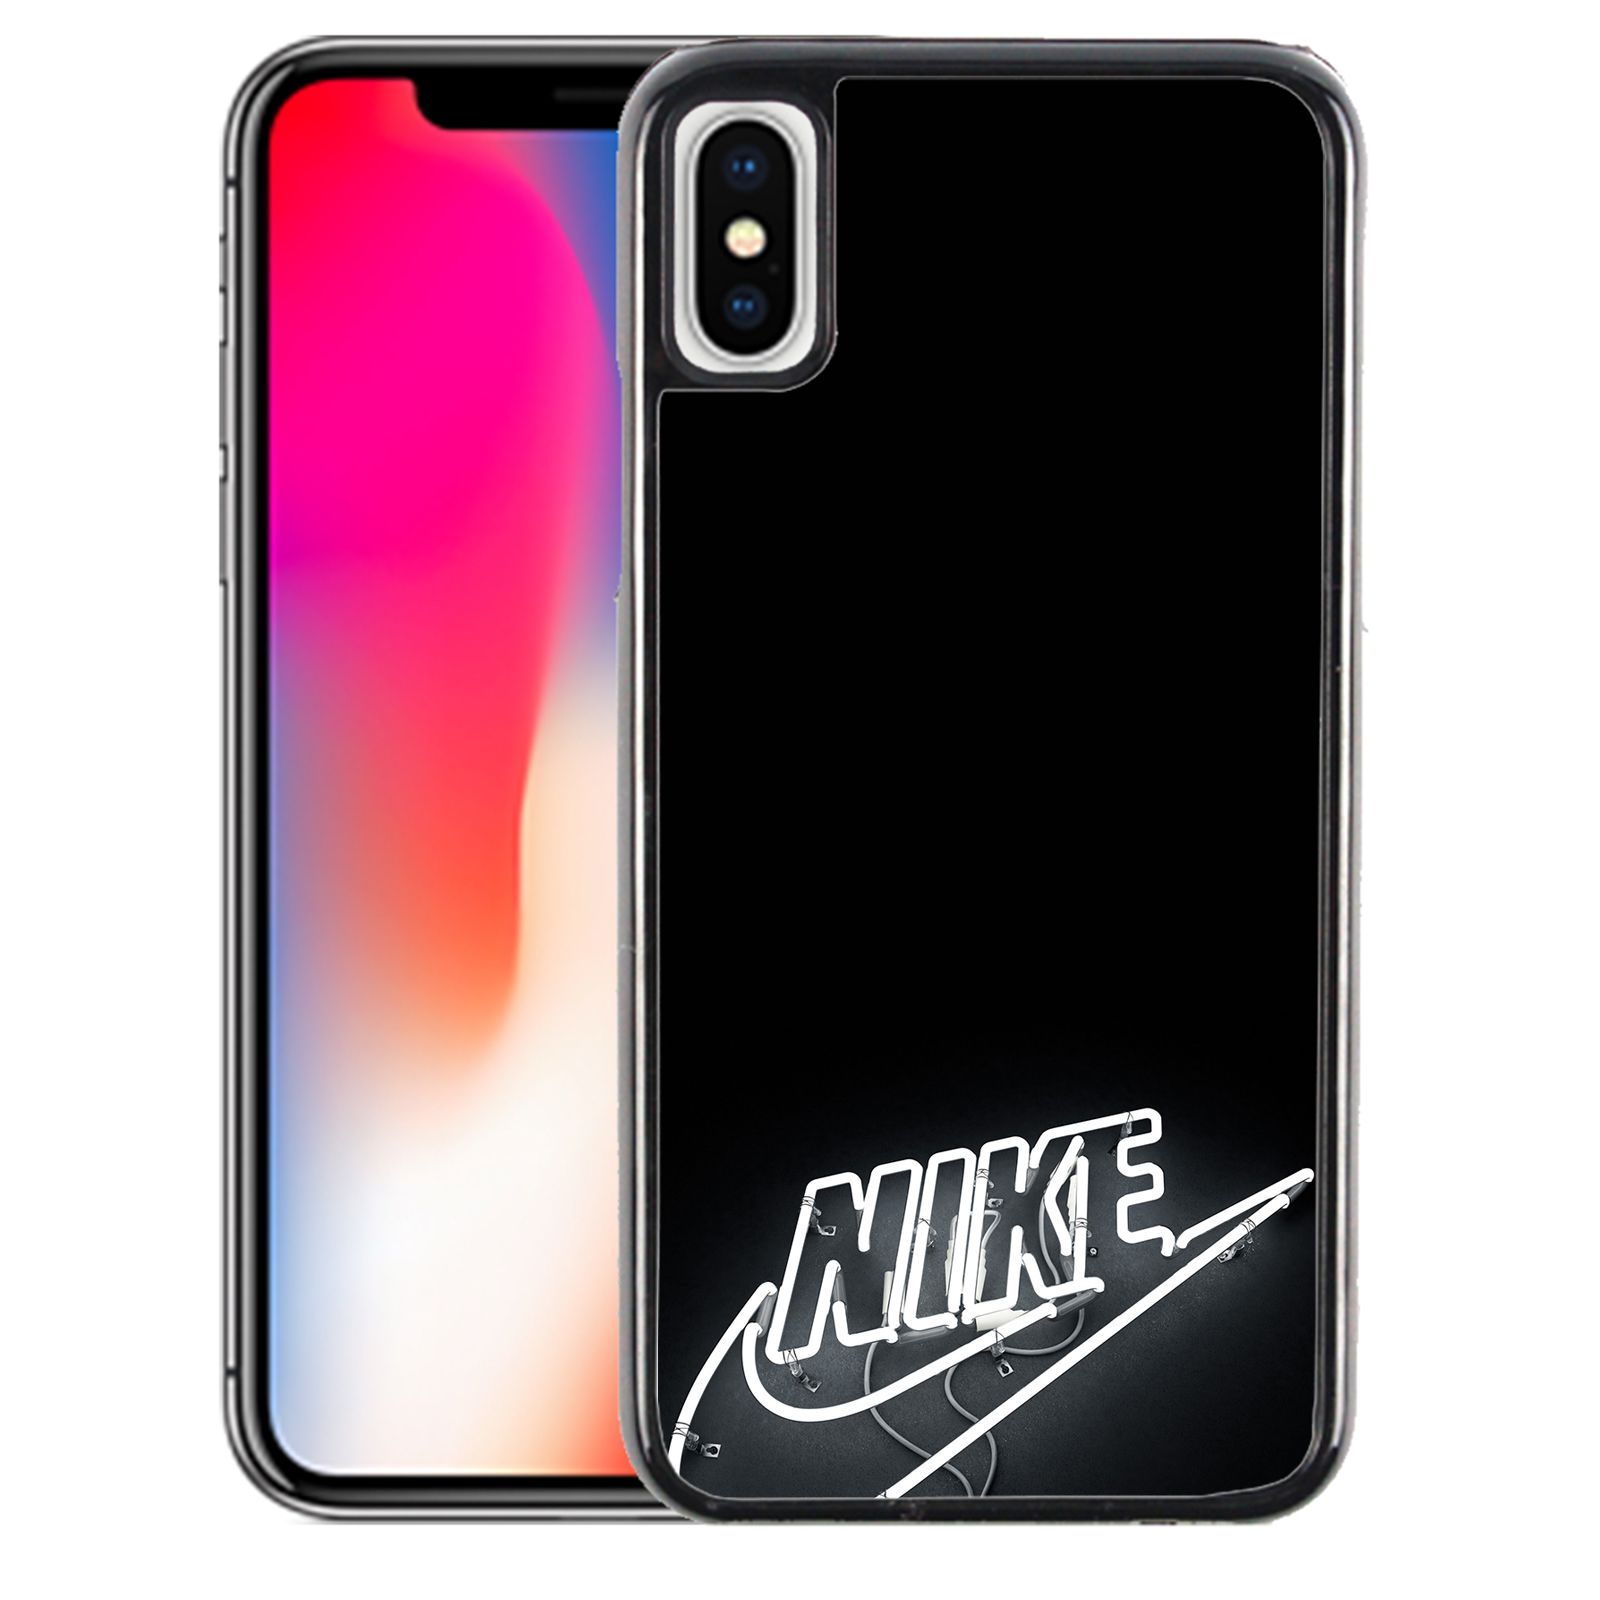 Is Apple iPhone 11 Pro Max 5G Compatible